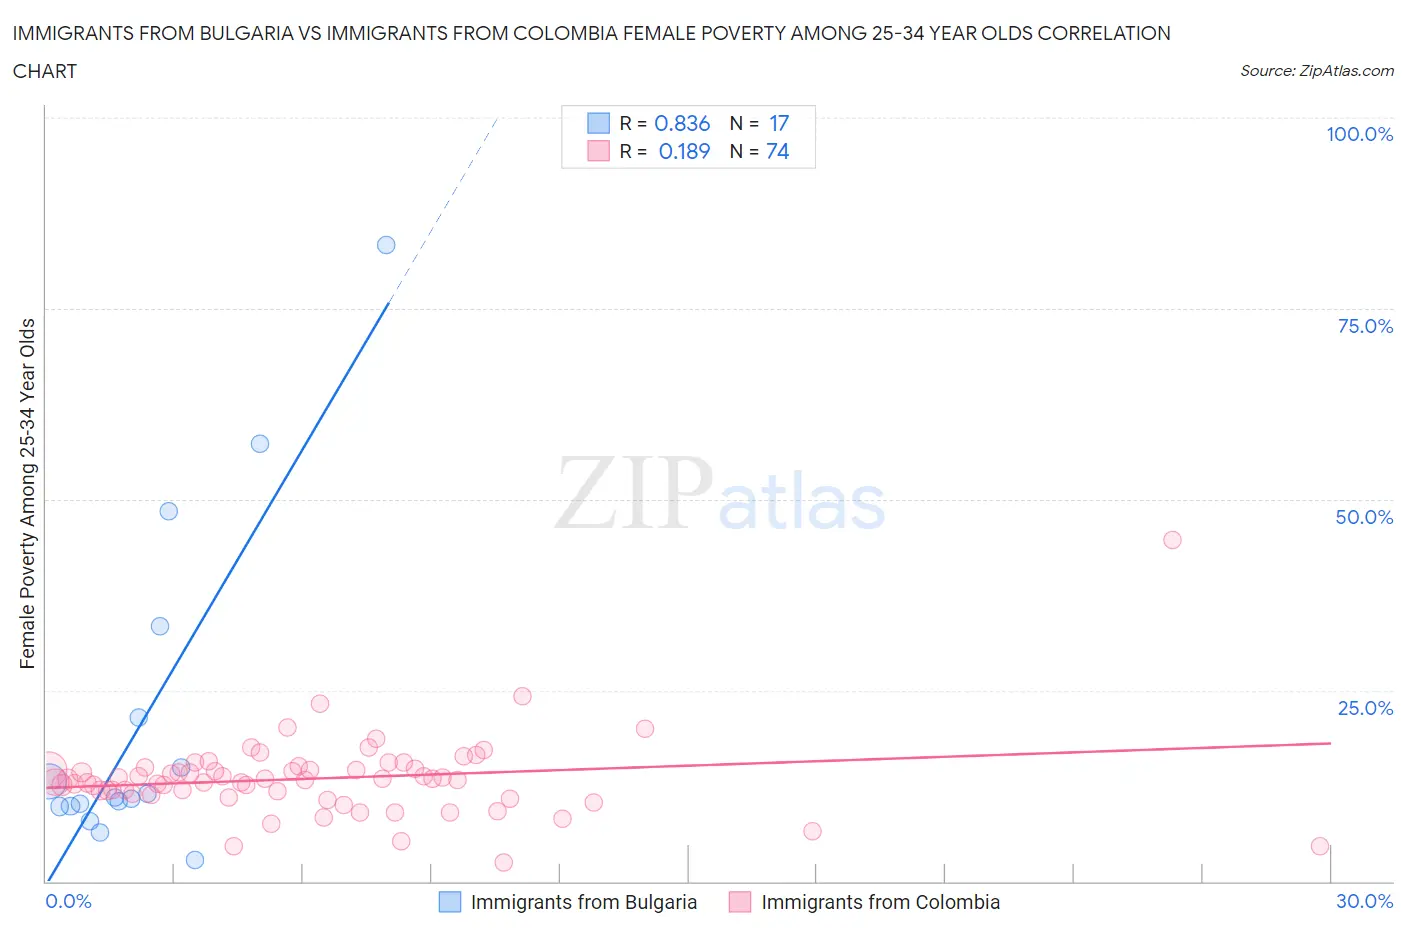 Immigrants from Bulgaria vs Immigrants from Colombia Female Poverty Among 25-34 Year Olds